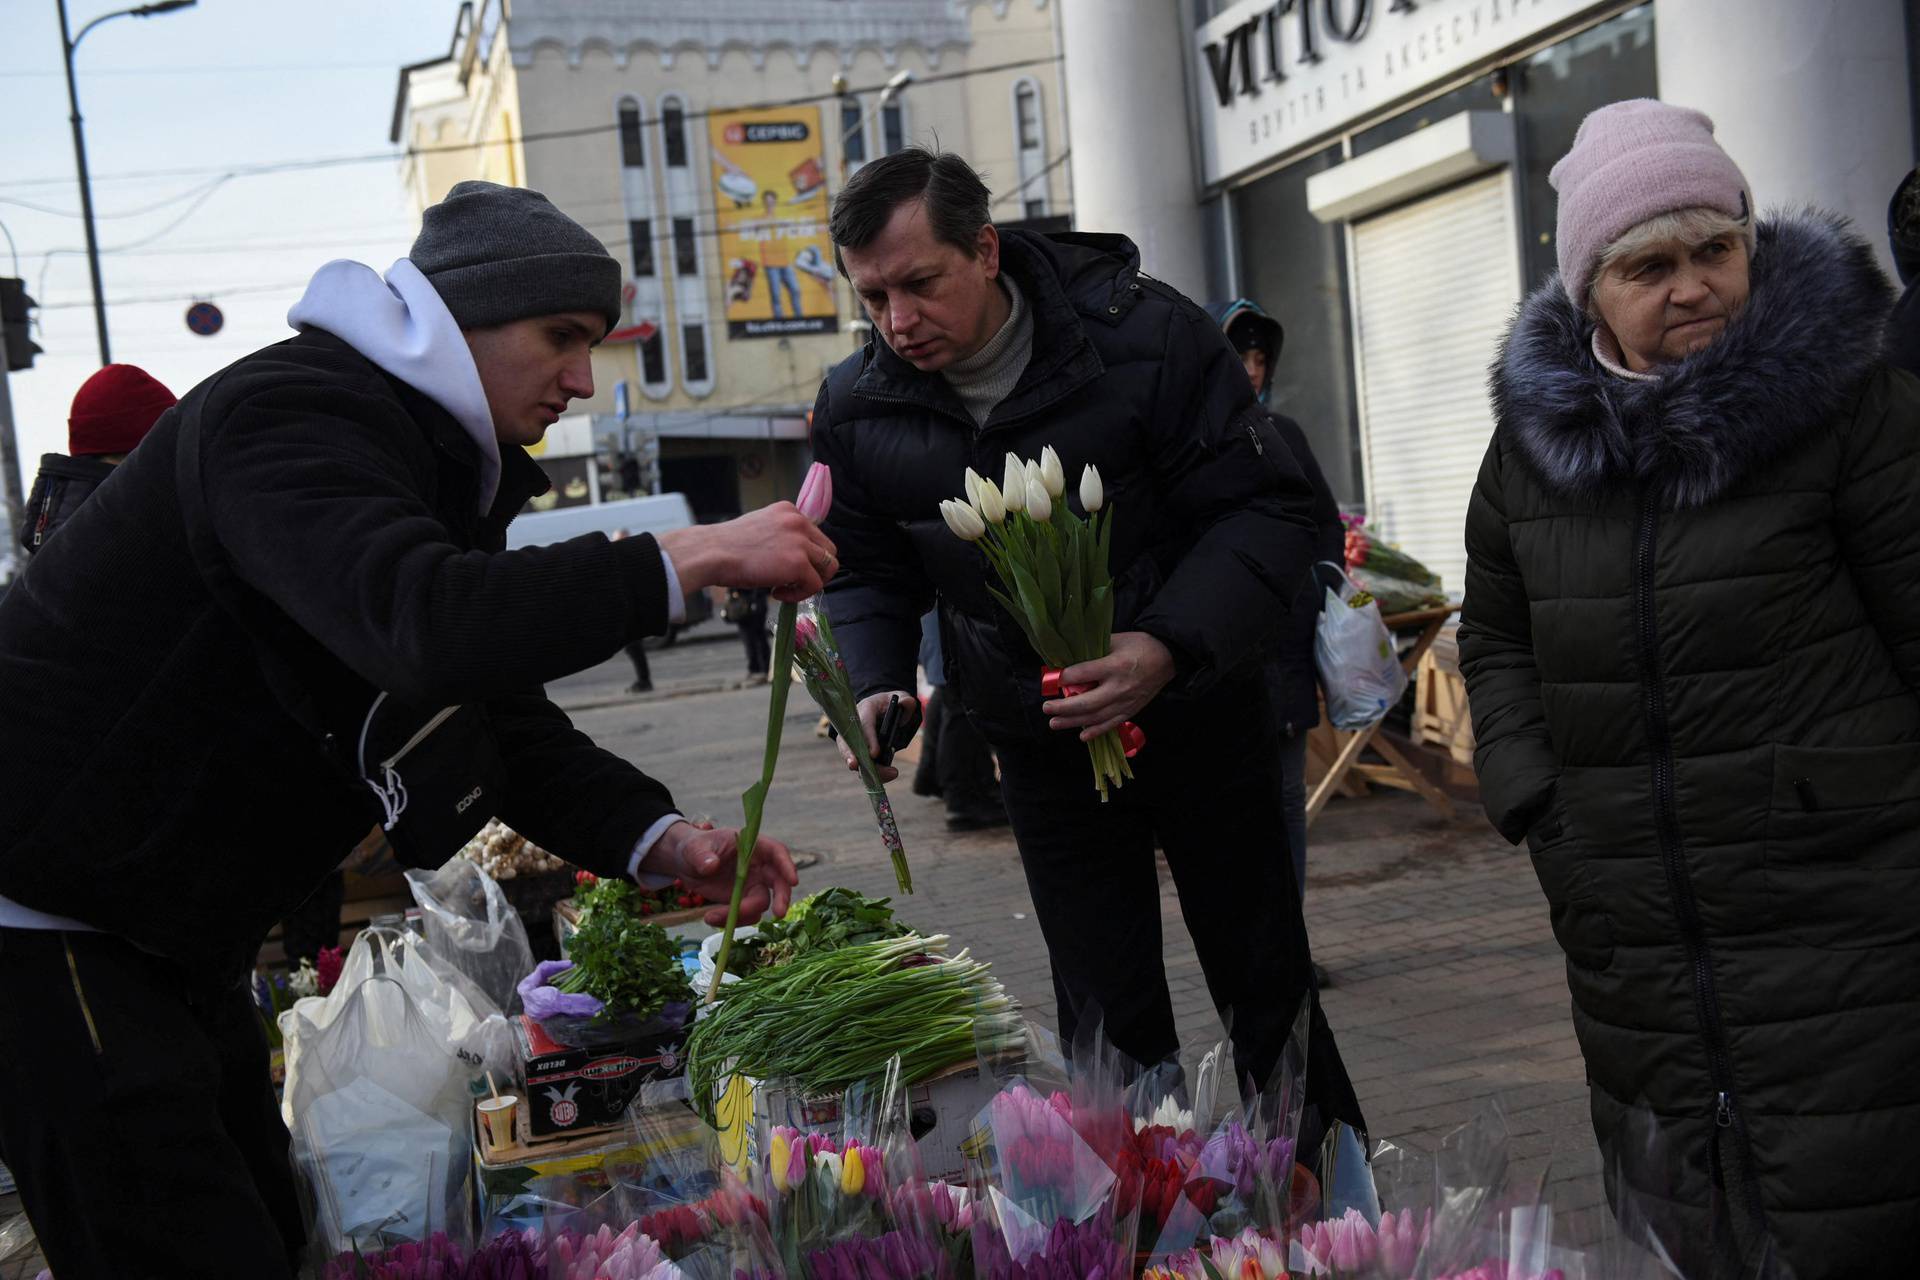 People buy flowers at a street market, amid Russia's invasion of Ukraine, in Odessa